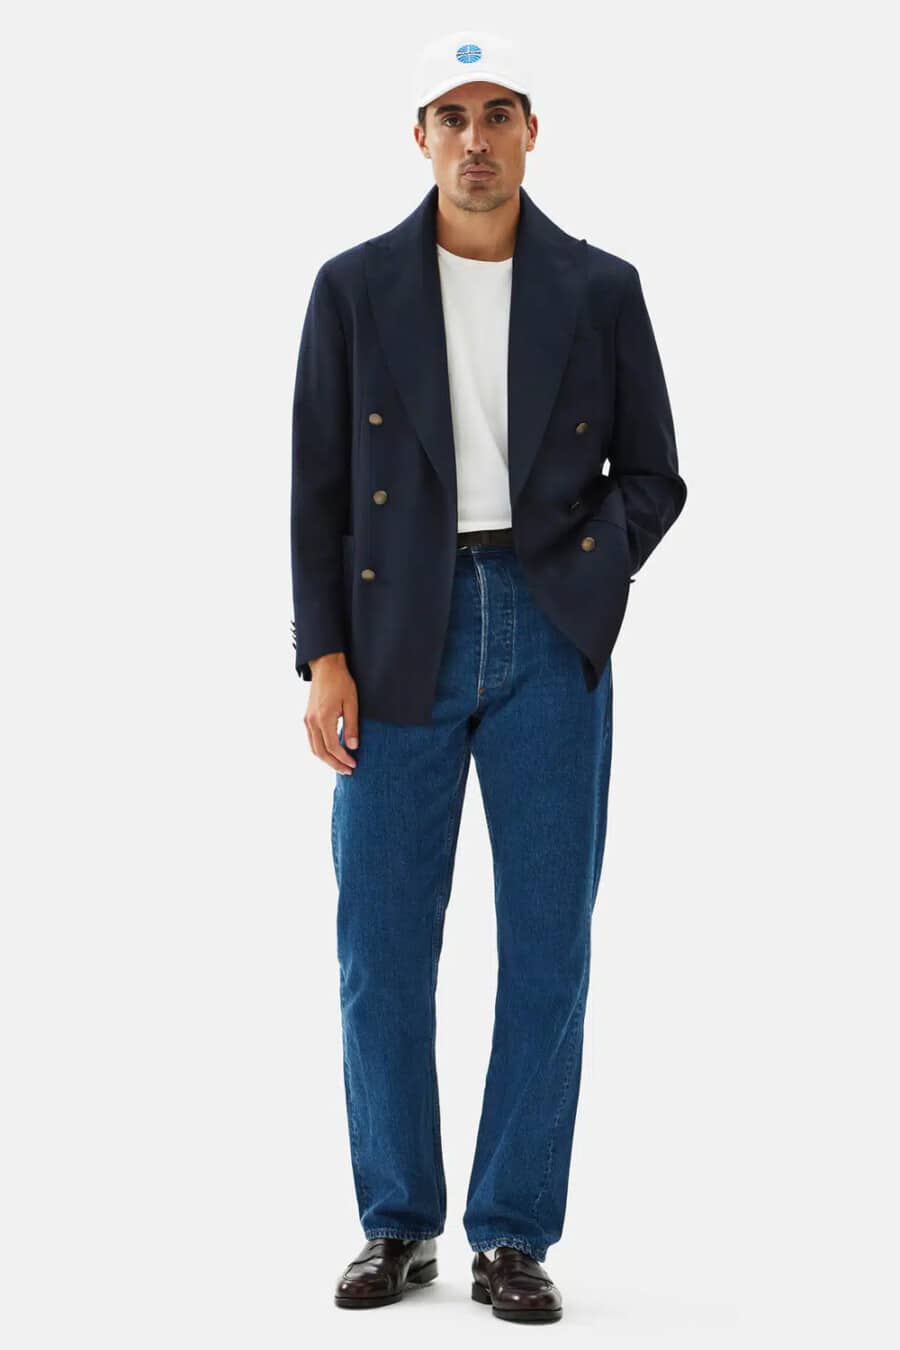 Men's navy double-breasted blazer, mid-wash jeans, white T-shirt tucked in, white baseball cap and brown leather penny loafers outfit